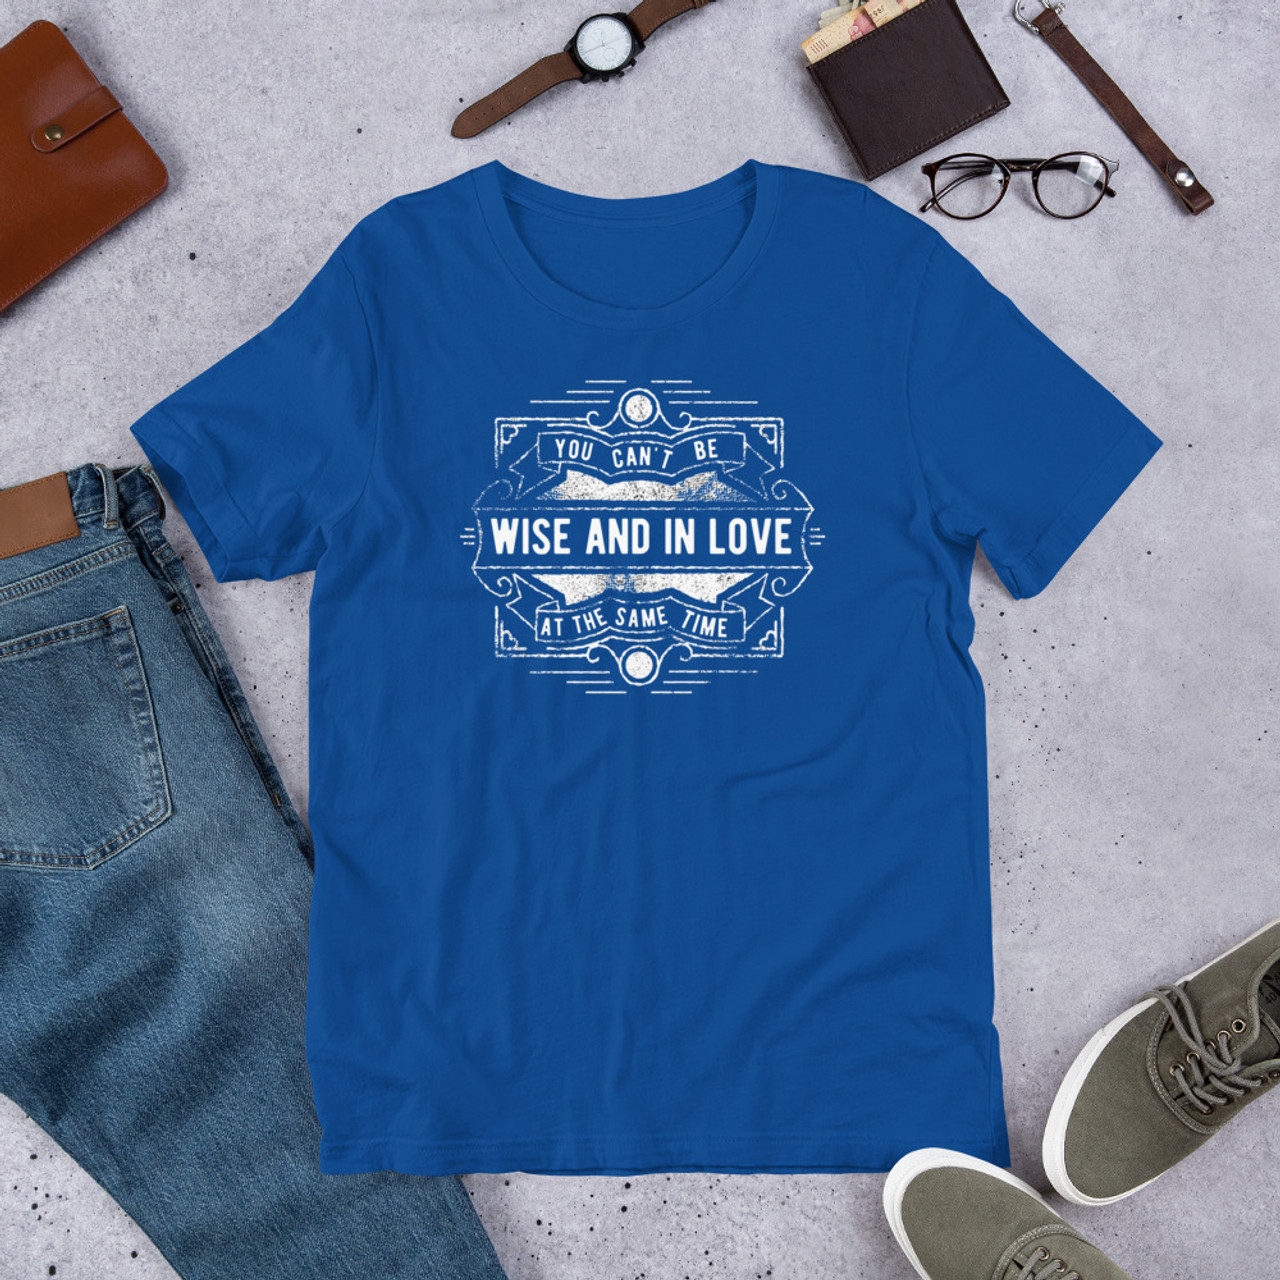 True Royal T-Shirt - Bella + Canvas 3001 Wise And In Love